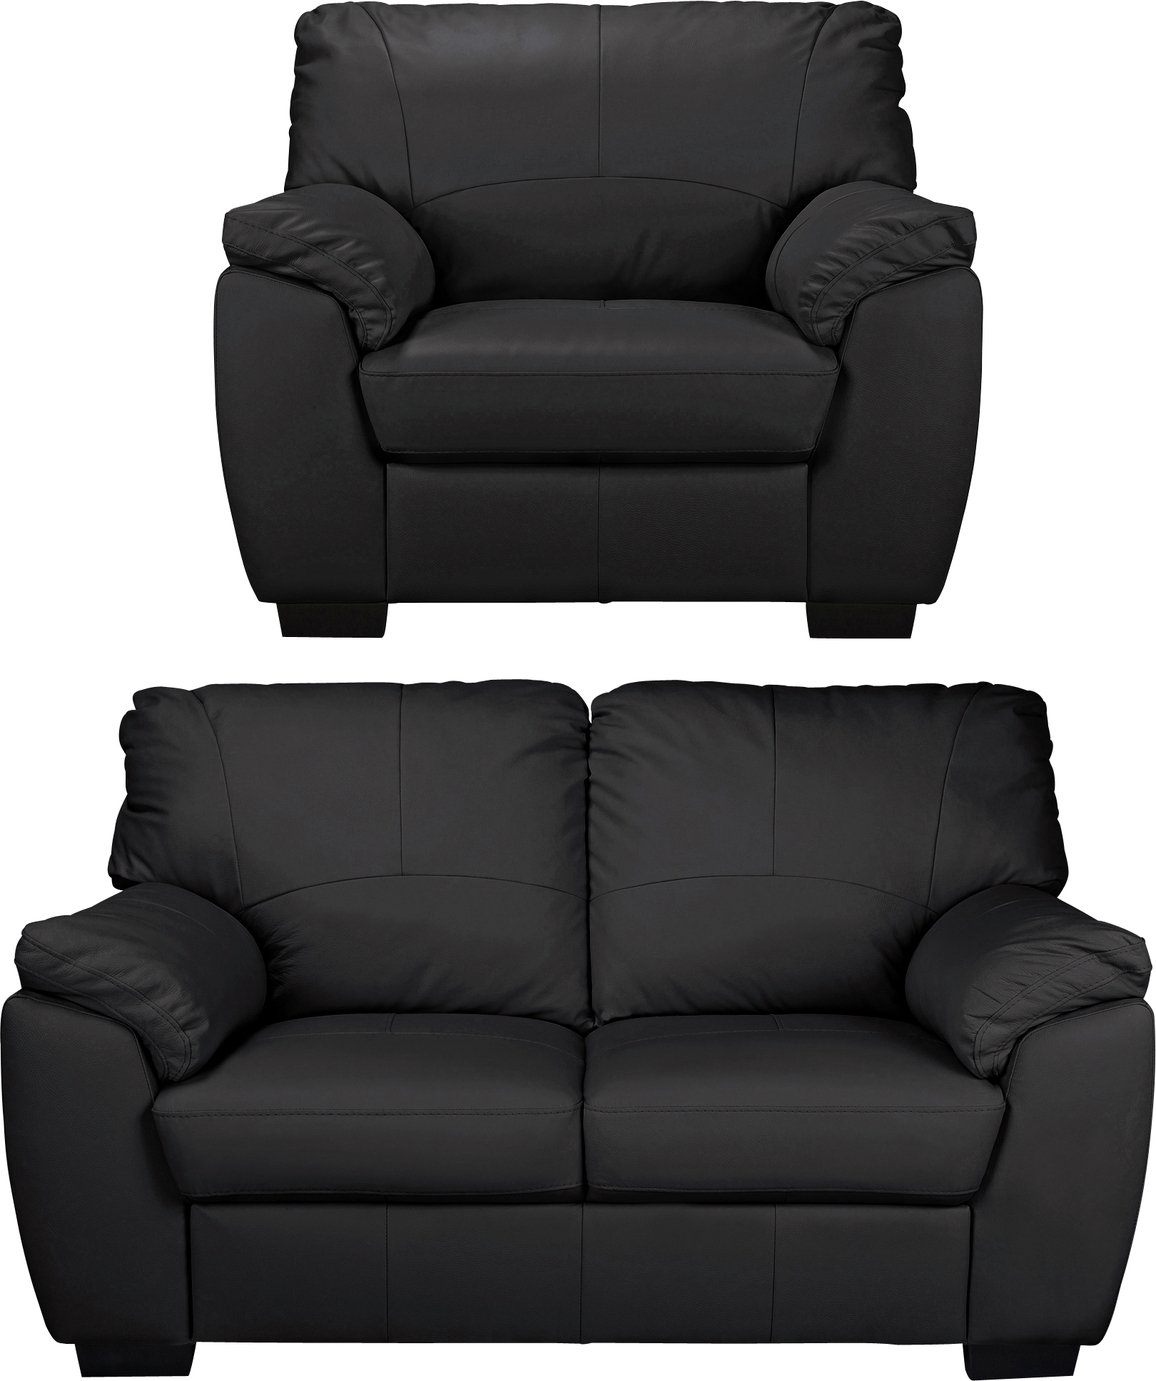 Argos Home Milano Leather Chair and 2 Seater Sofa - Black